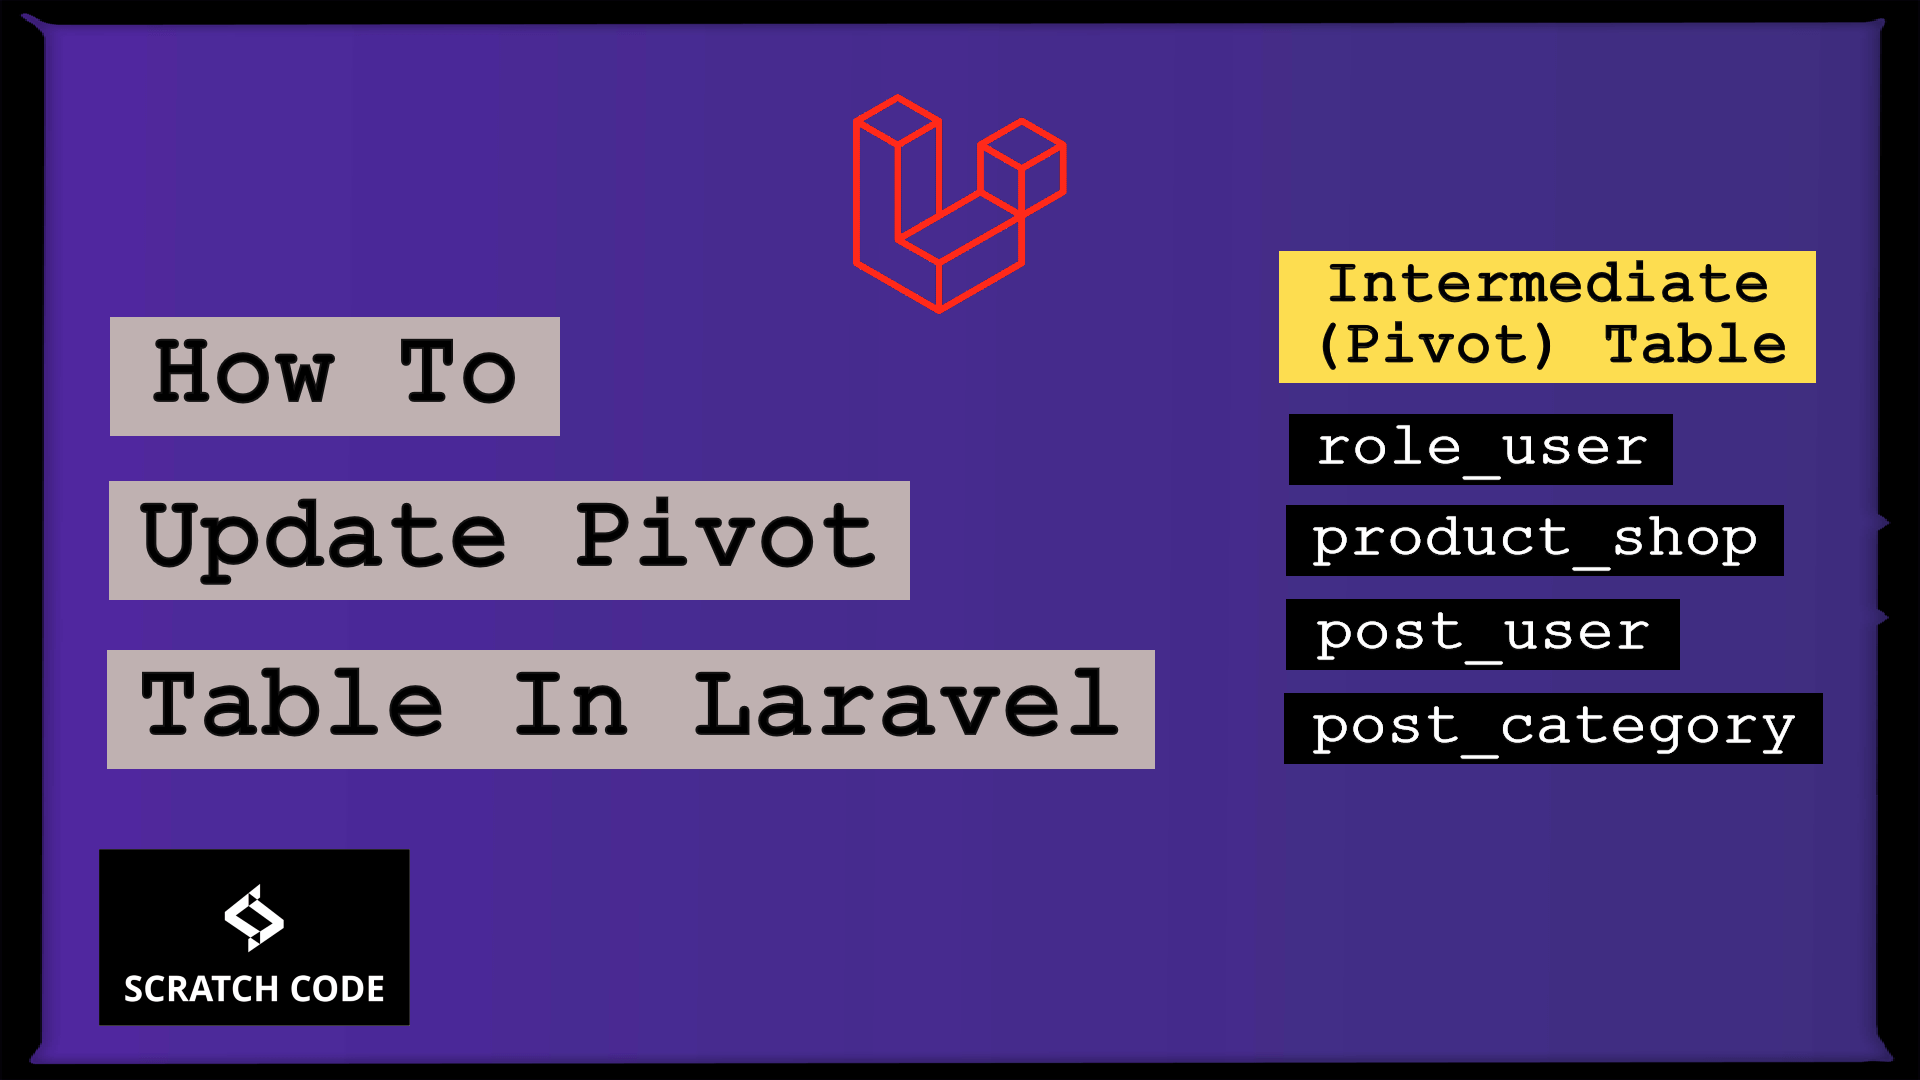 lethal Turns into to invent How To Update Pivot Table In Laravel | Scratch Code